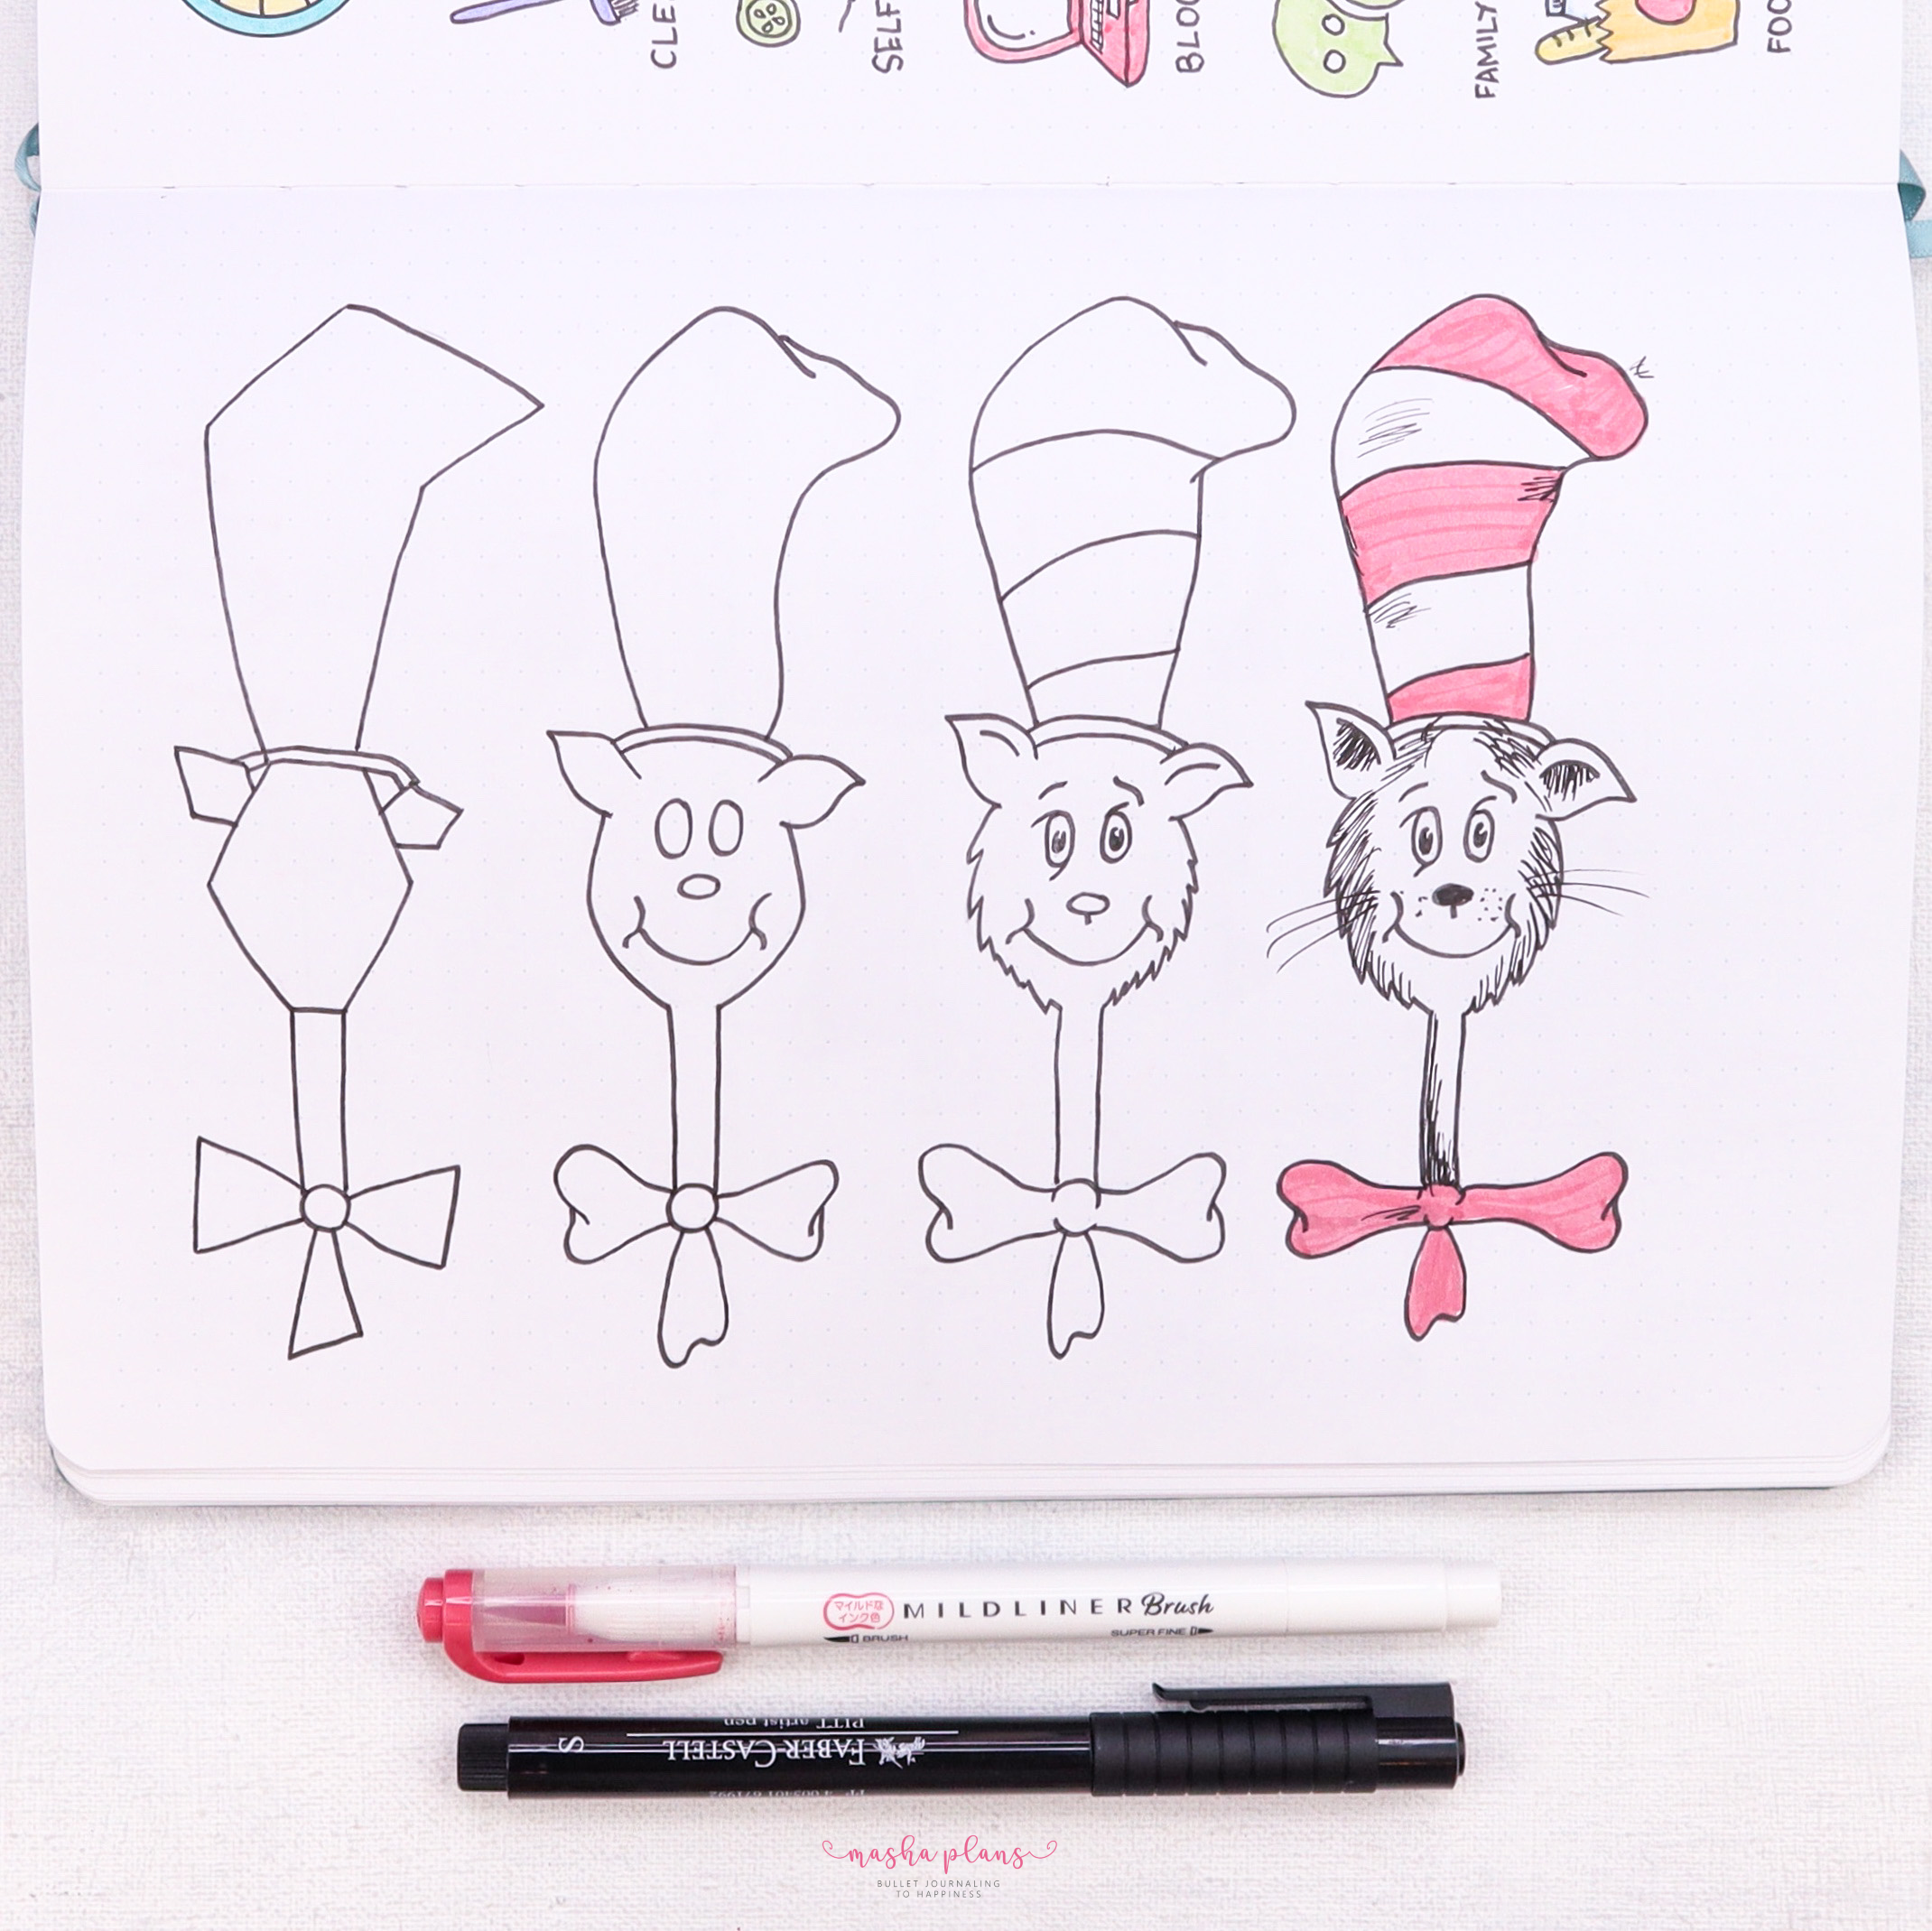 tutorial, how to, dr seuss, masha plans, archer and olive, cat in the hat